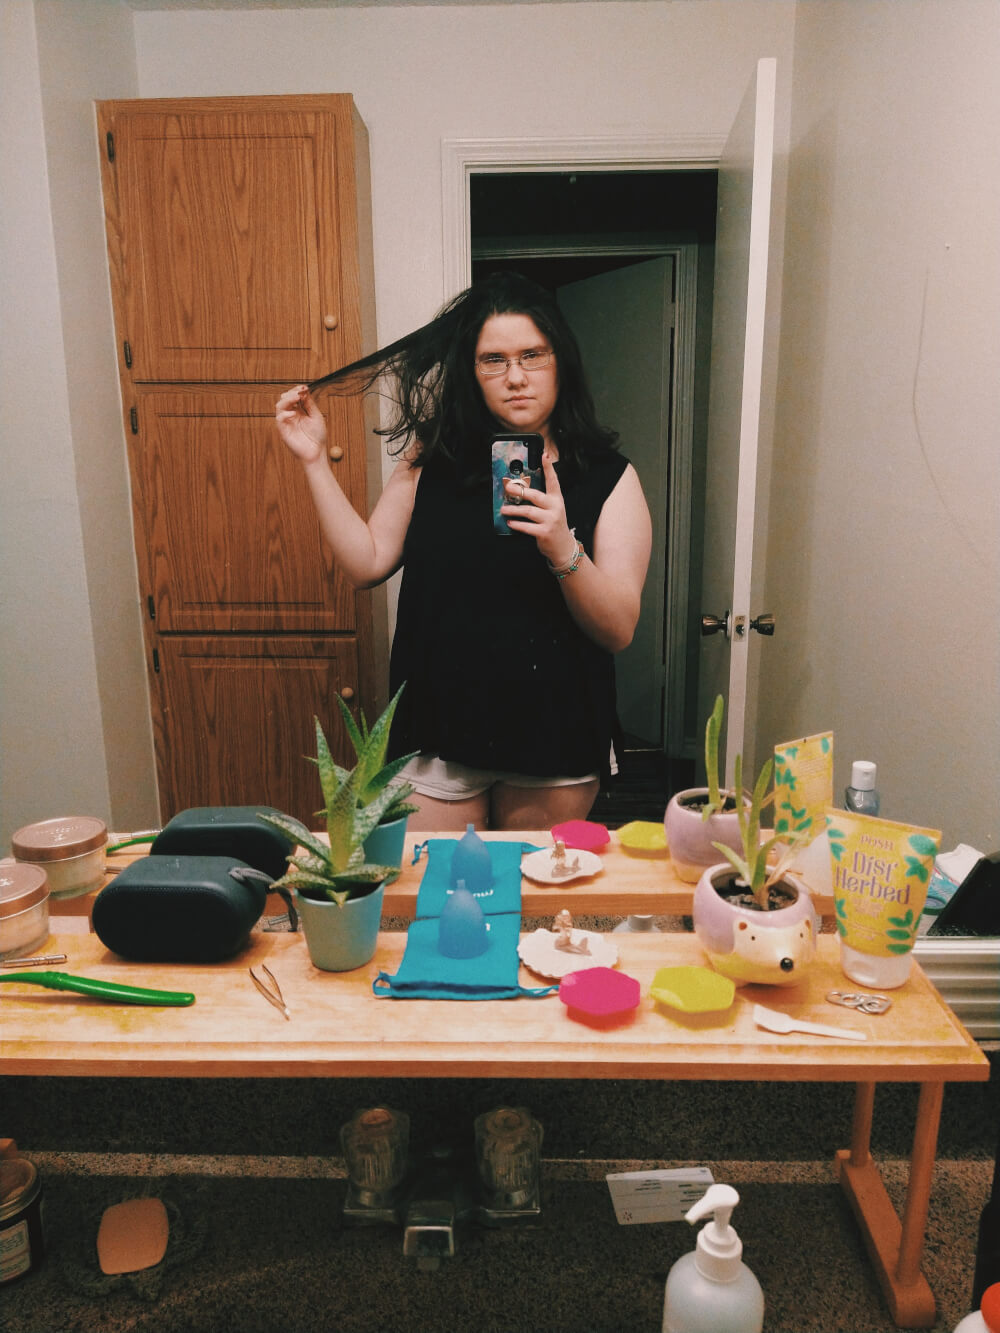 Standing in front of bathroom mirror in boyshorts, holding piece of hair out